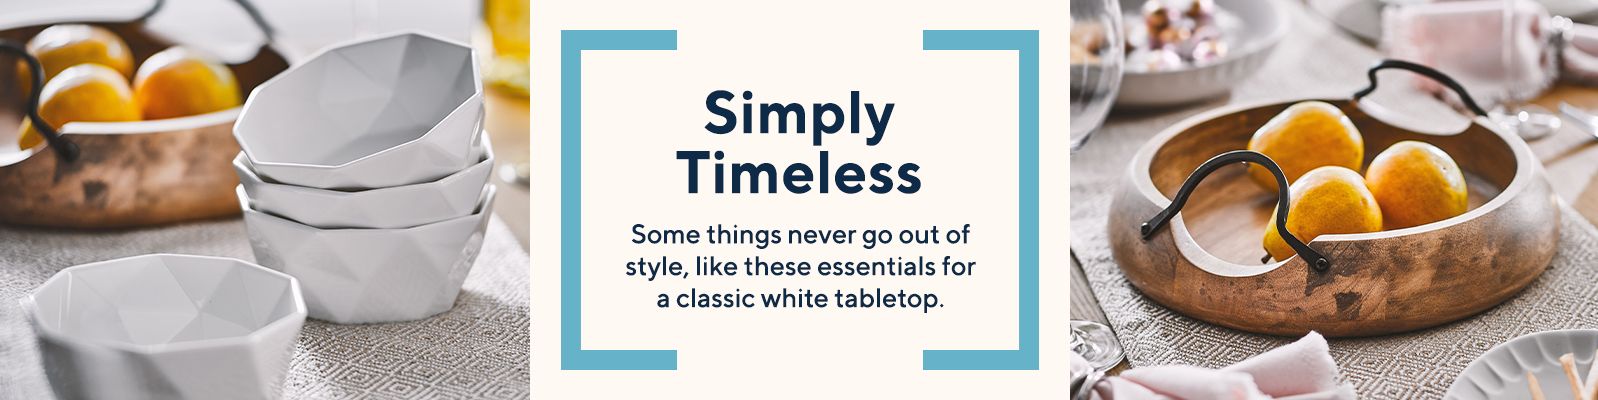 Simply Timeless Some things never go out of style, like these essentials for a classic white tabletop. 